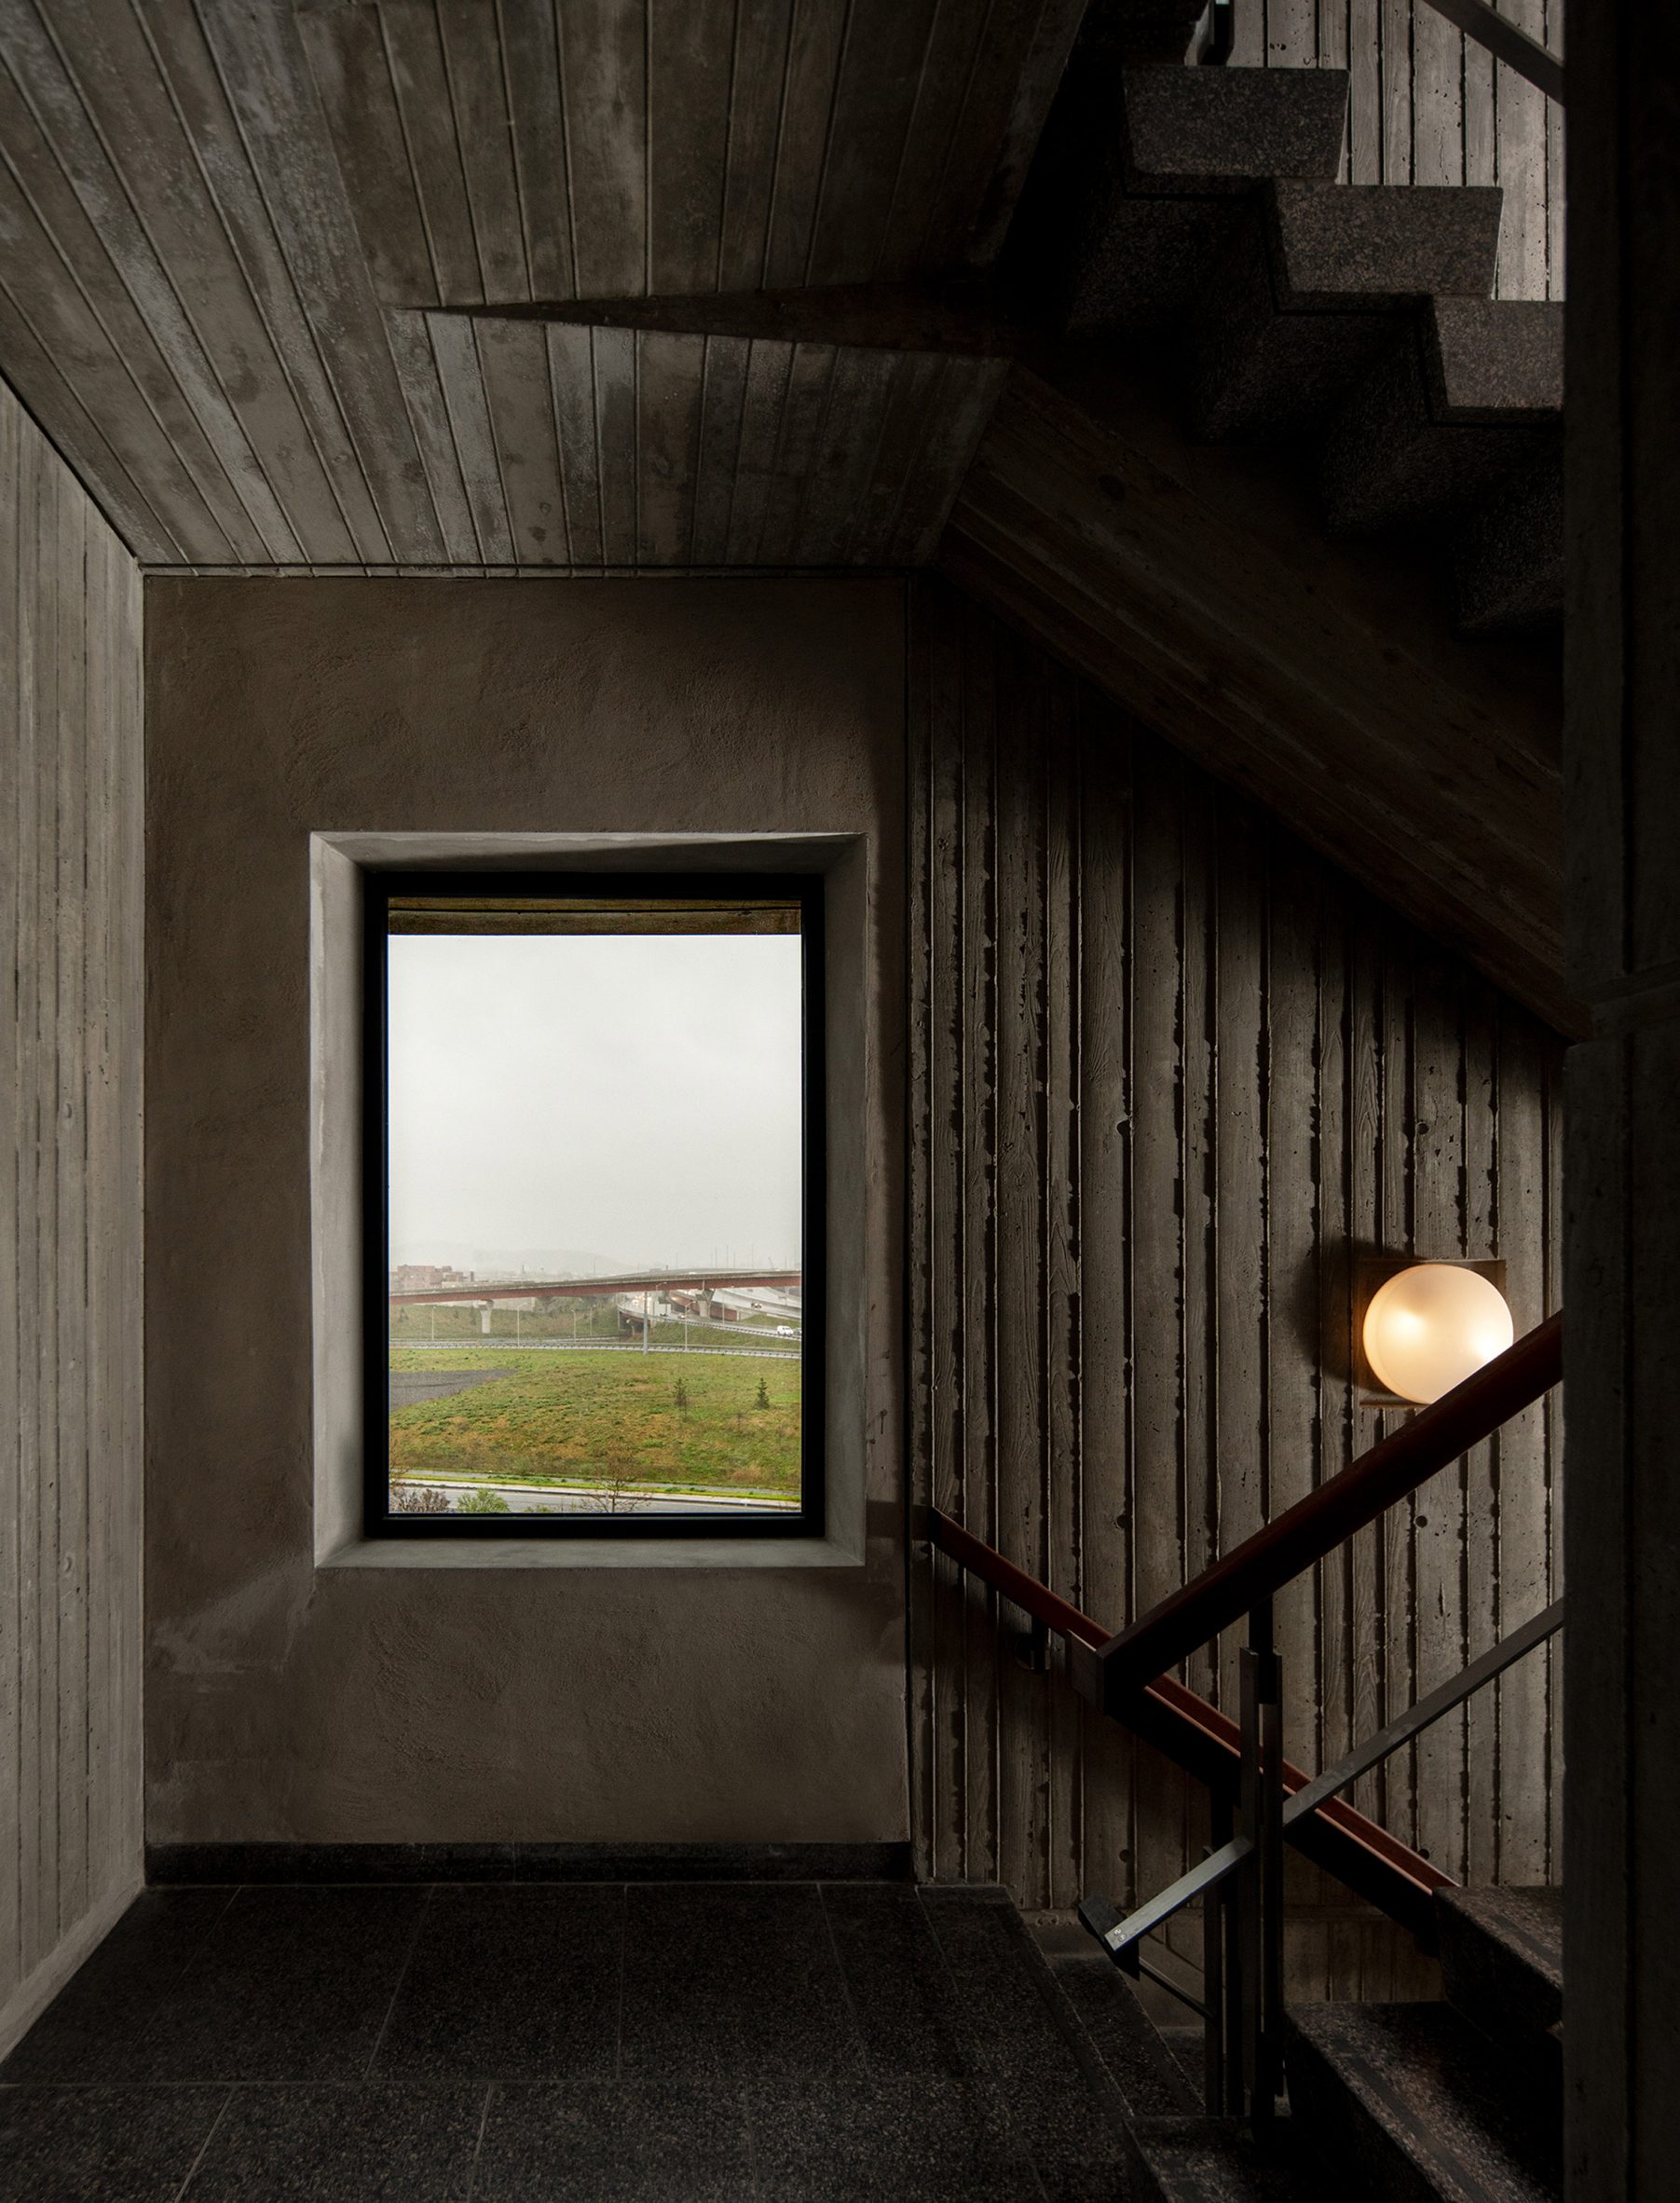 Concrete stairwell with exterior window